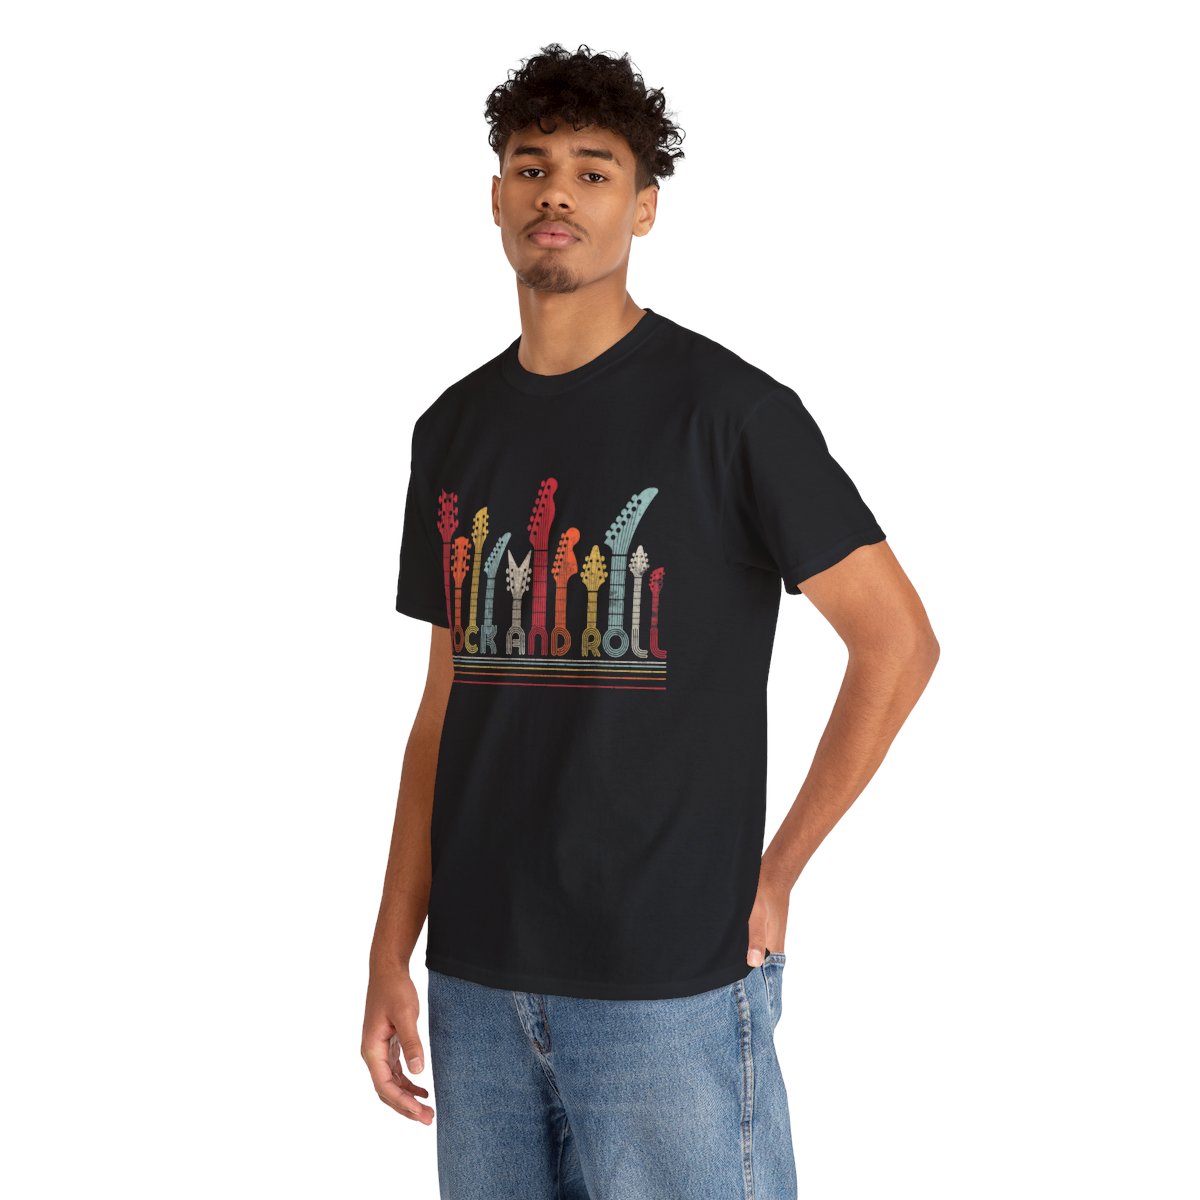 Rock And Roll Shirt, Retro Style Graphic T-Shirt